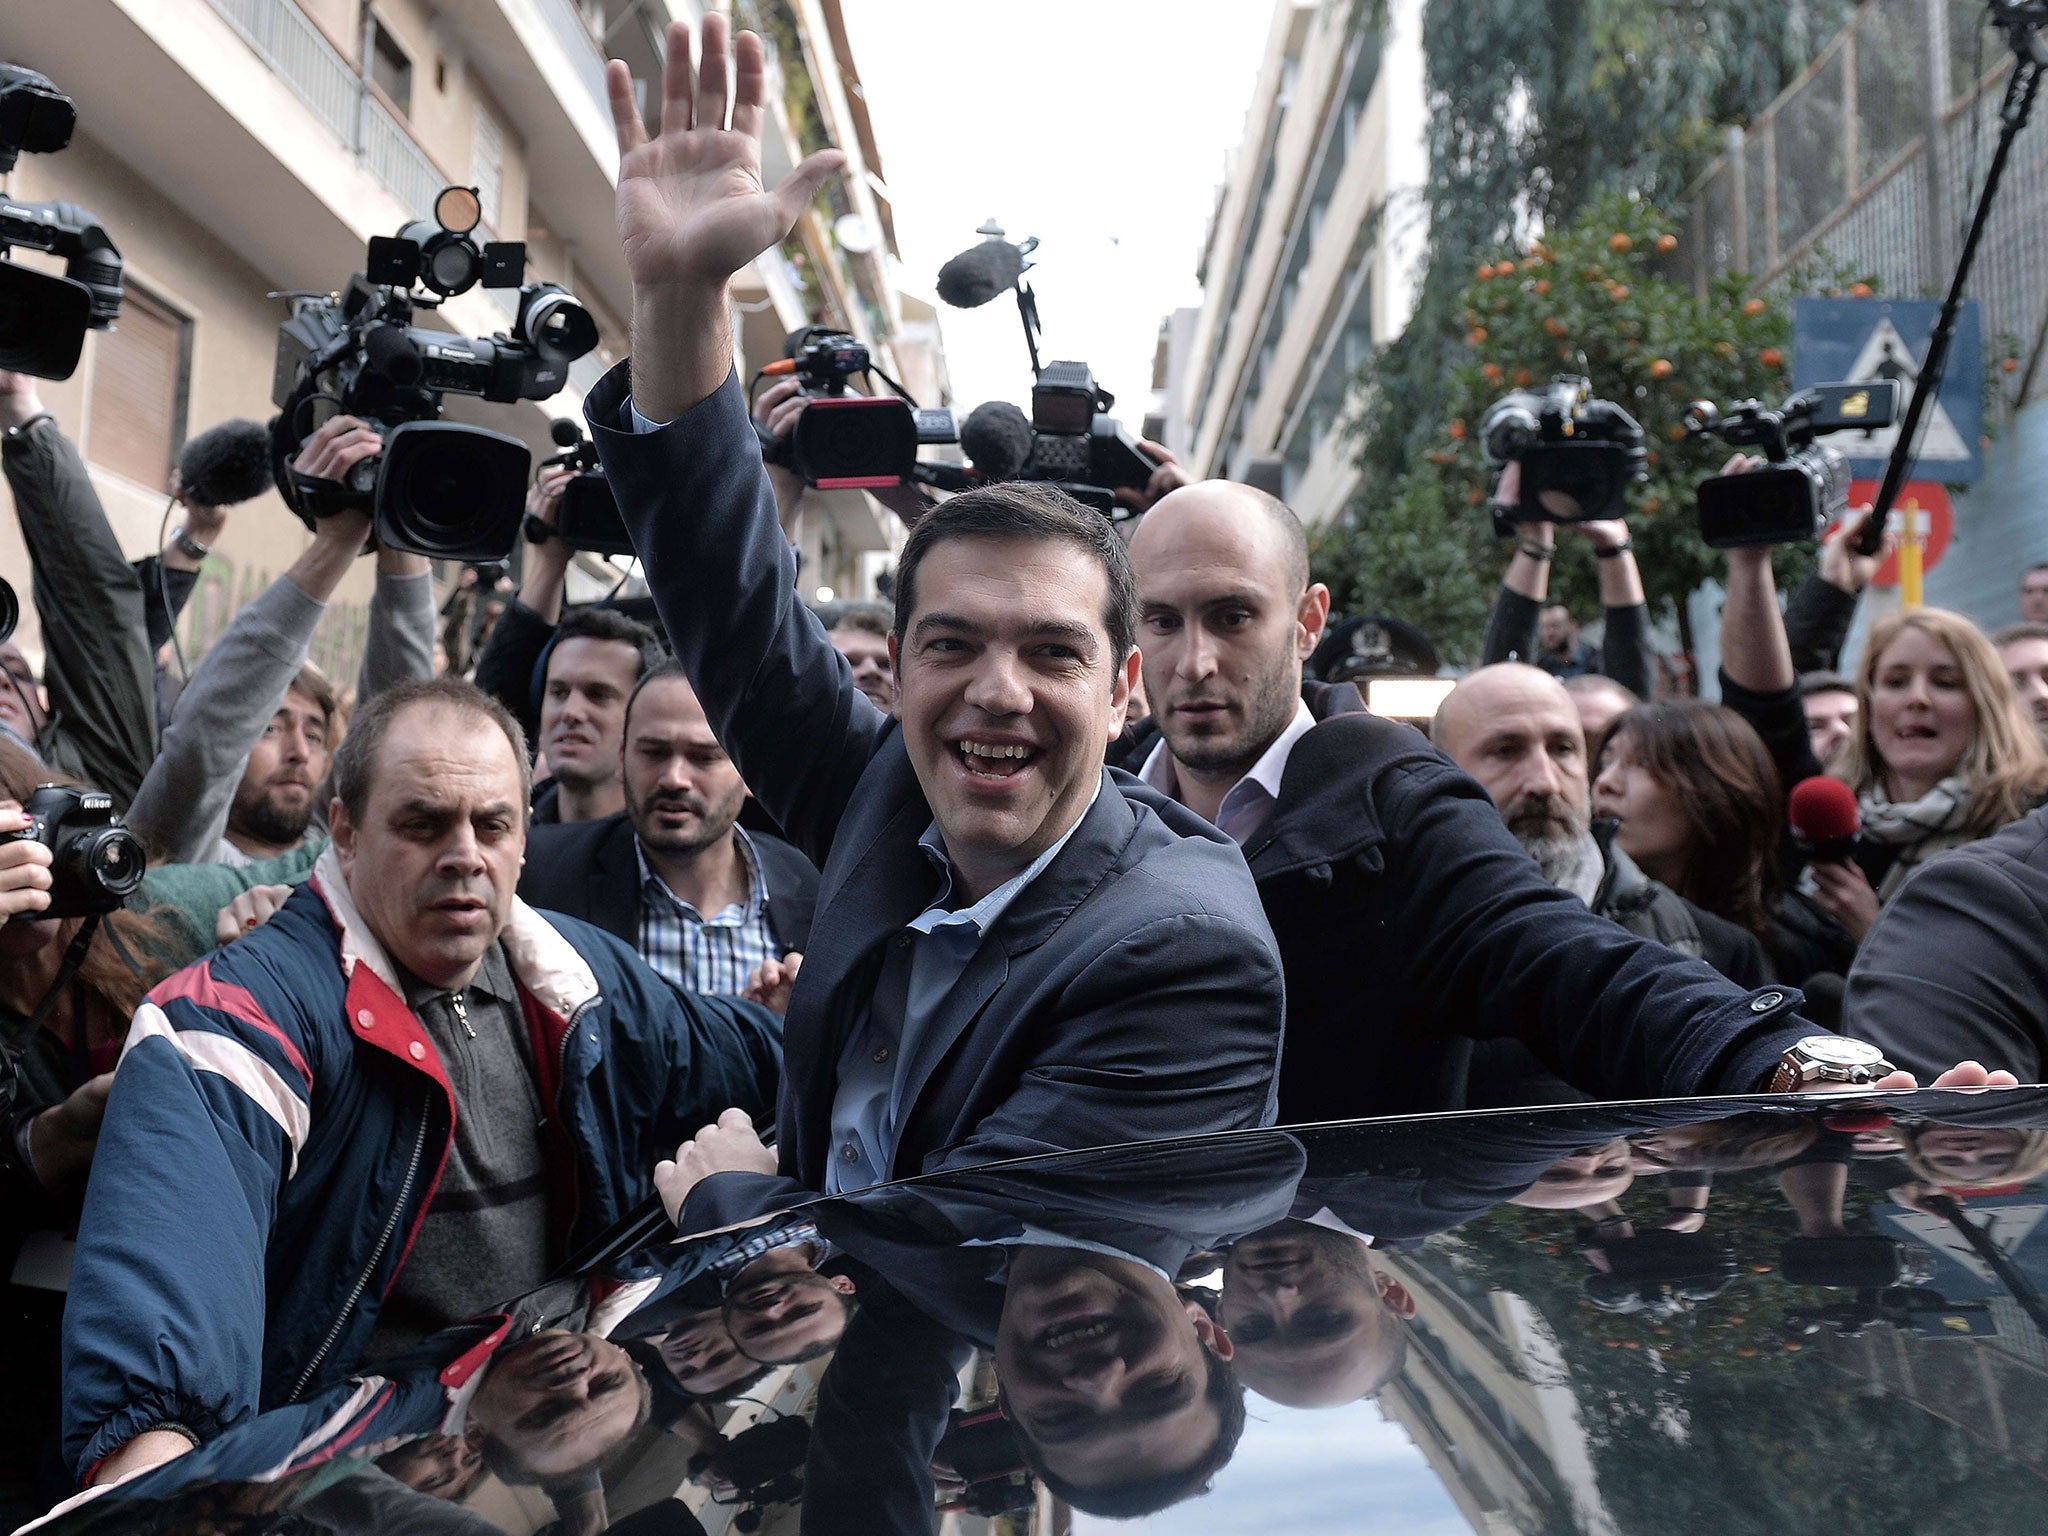 Alexis Tsipras, leader of the Syriza party, greets supporters after casting his vote in Athens for Greece's general elections on January 25, 2015